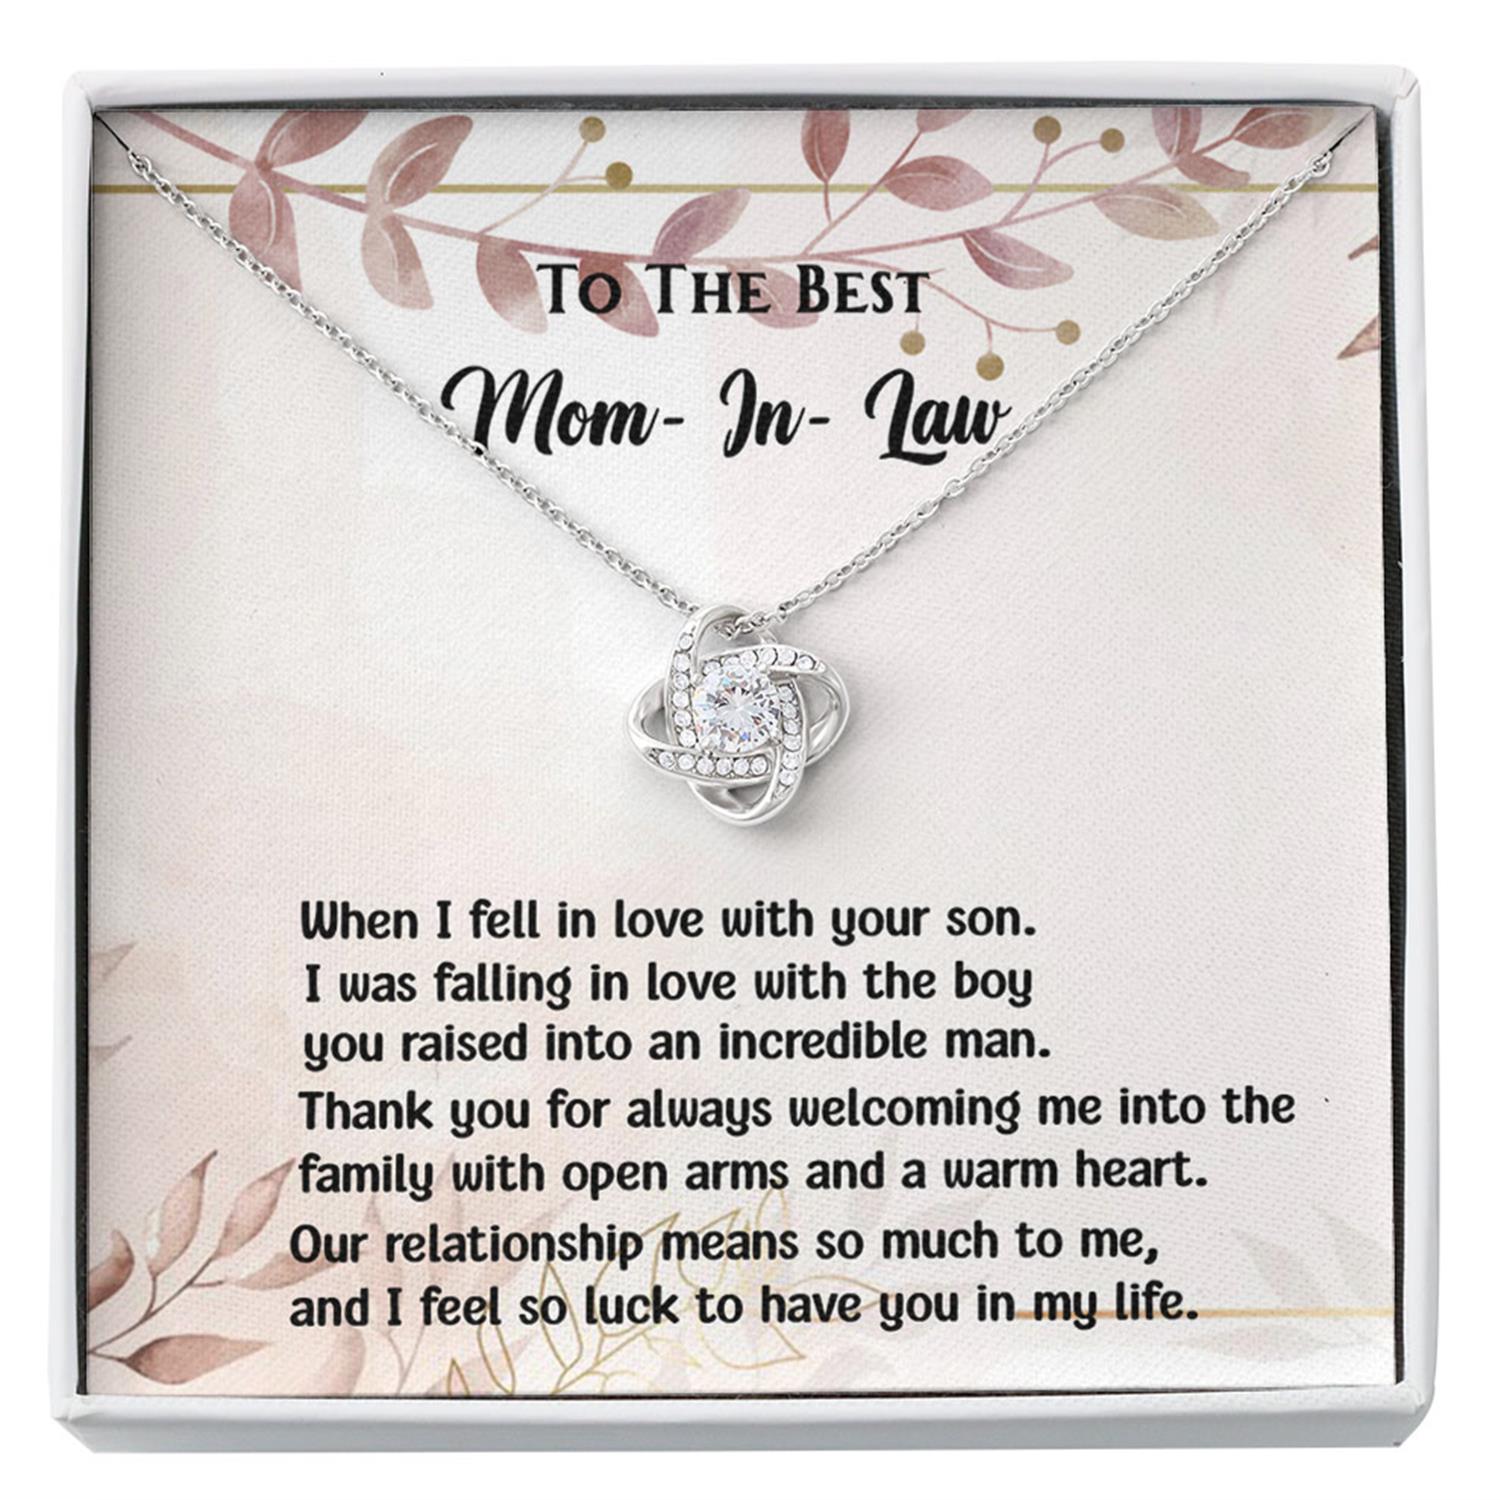 Mother-in-law Necklace, To My Mother In Law Gift Necklace, Mother In Law Gifts For , Anniversary Custom Necklace